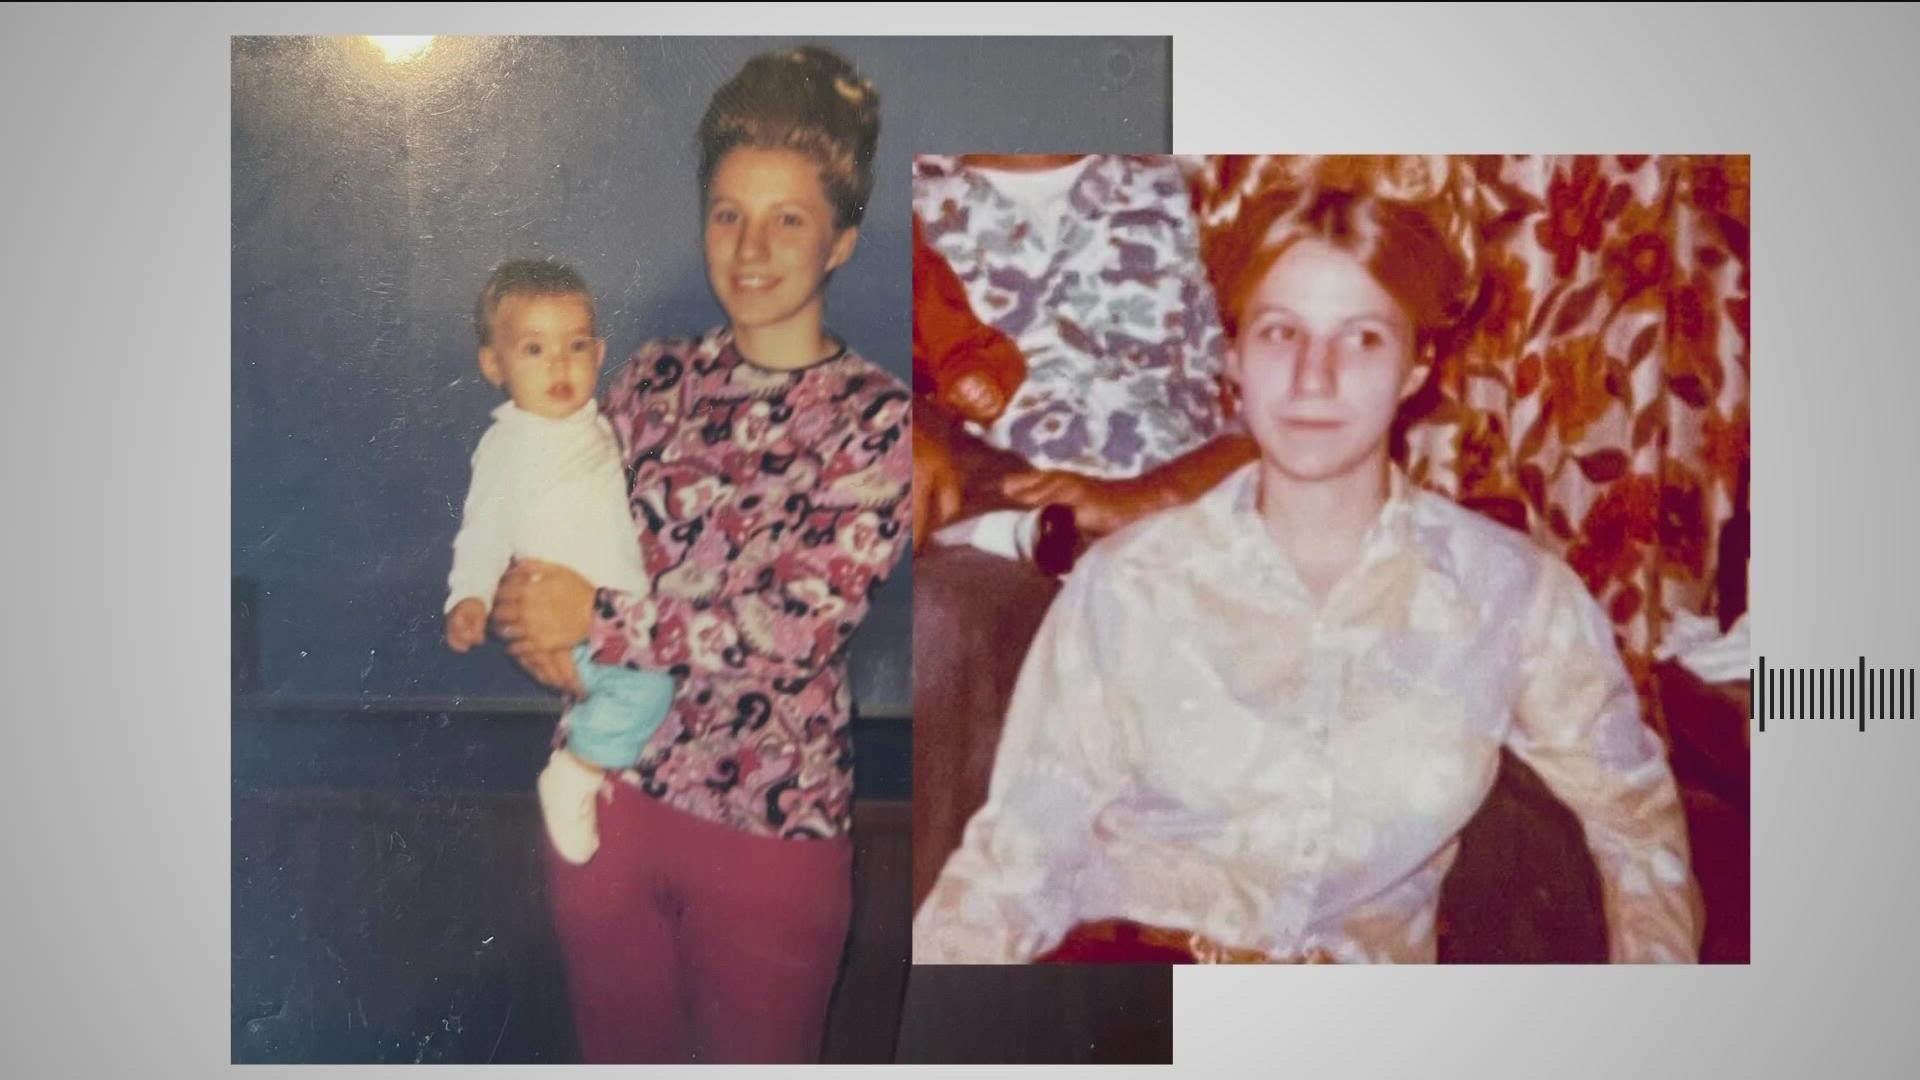 Patty Lee Otto went missing from Lewiston in 1976. Two years later, a woman's remains were found in Oregon. Police found no additional evidence to connect the cases.